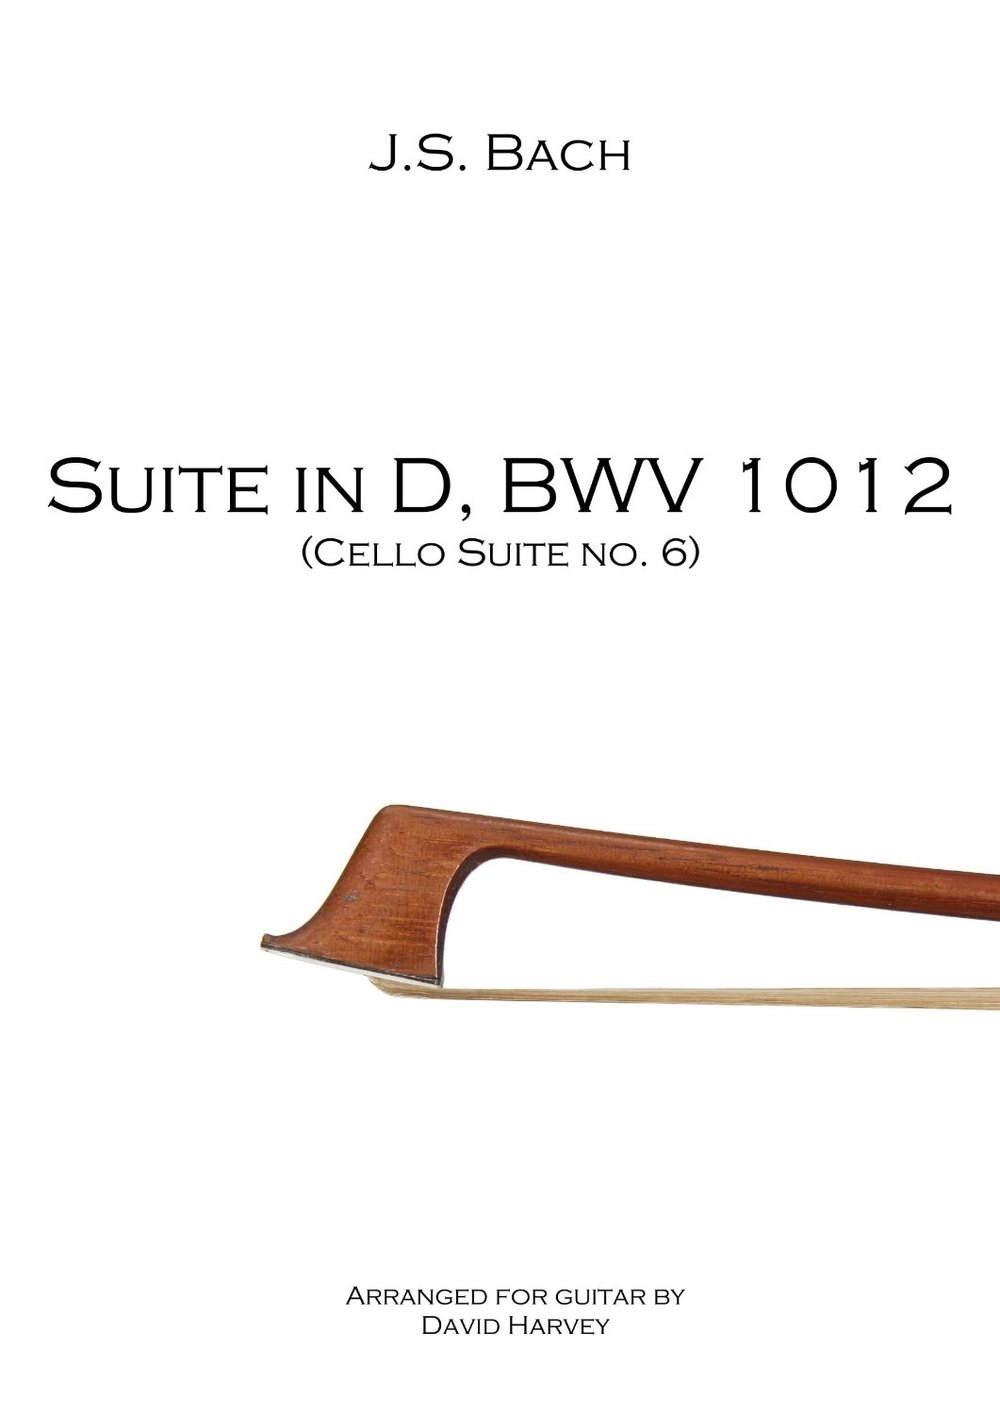 Suite in D, BWV 1012 (6th Cello Suite) - cover